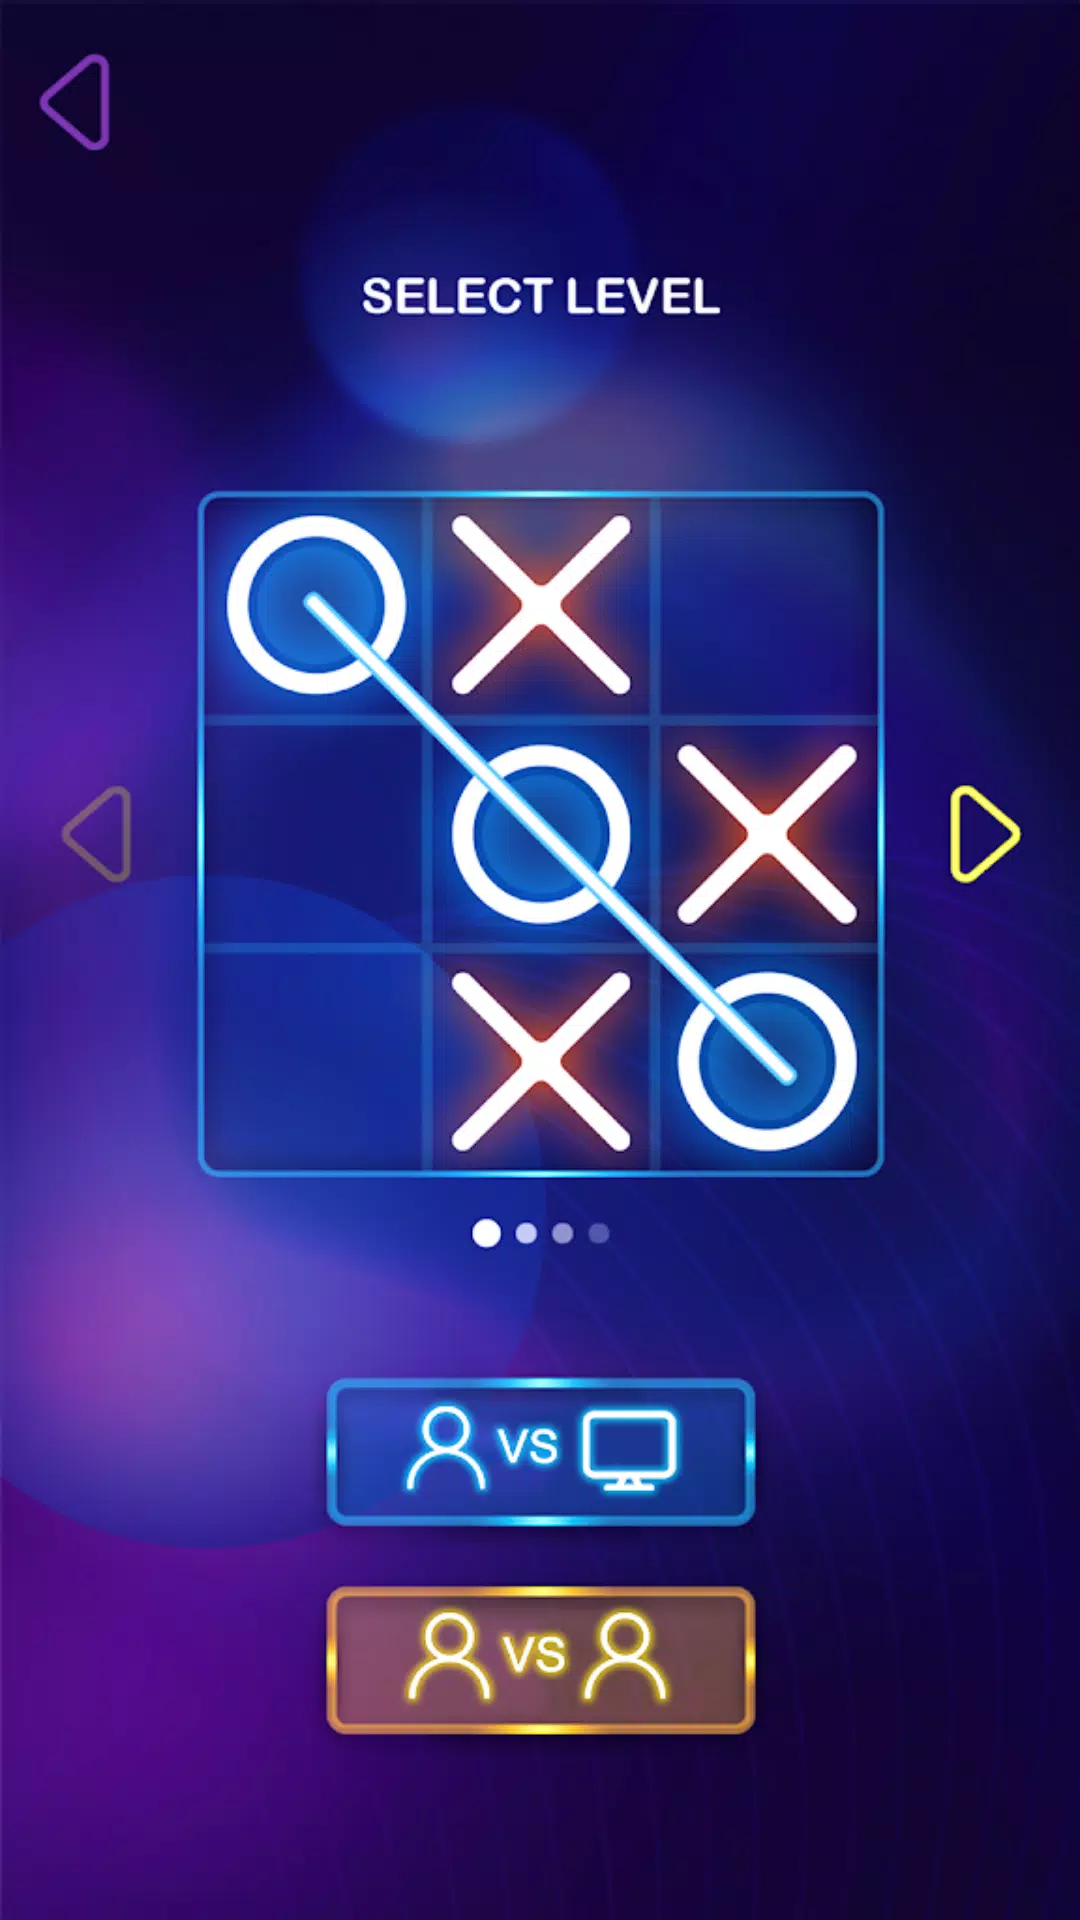 Tic Tac Toe 2 Player - xo game APK for Android Download